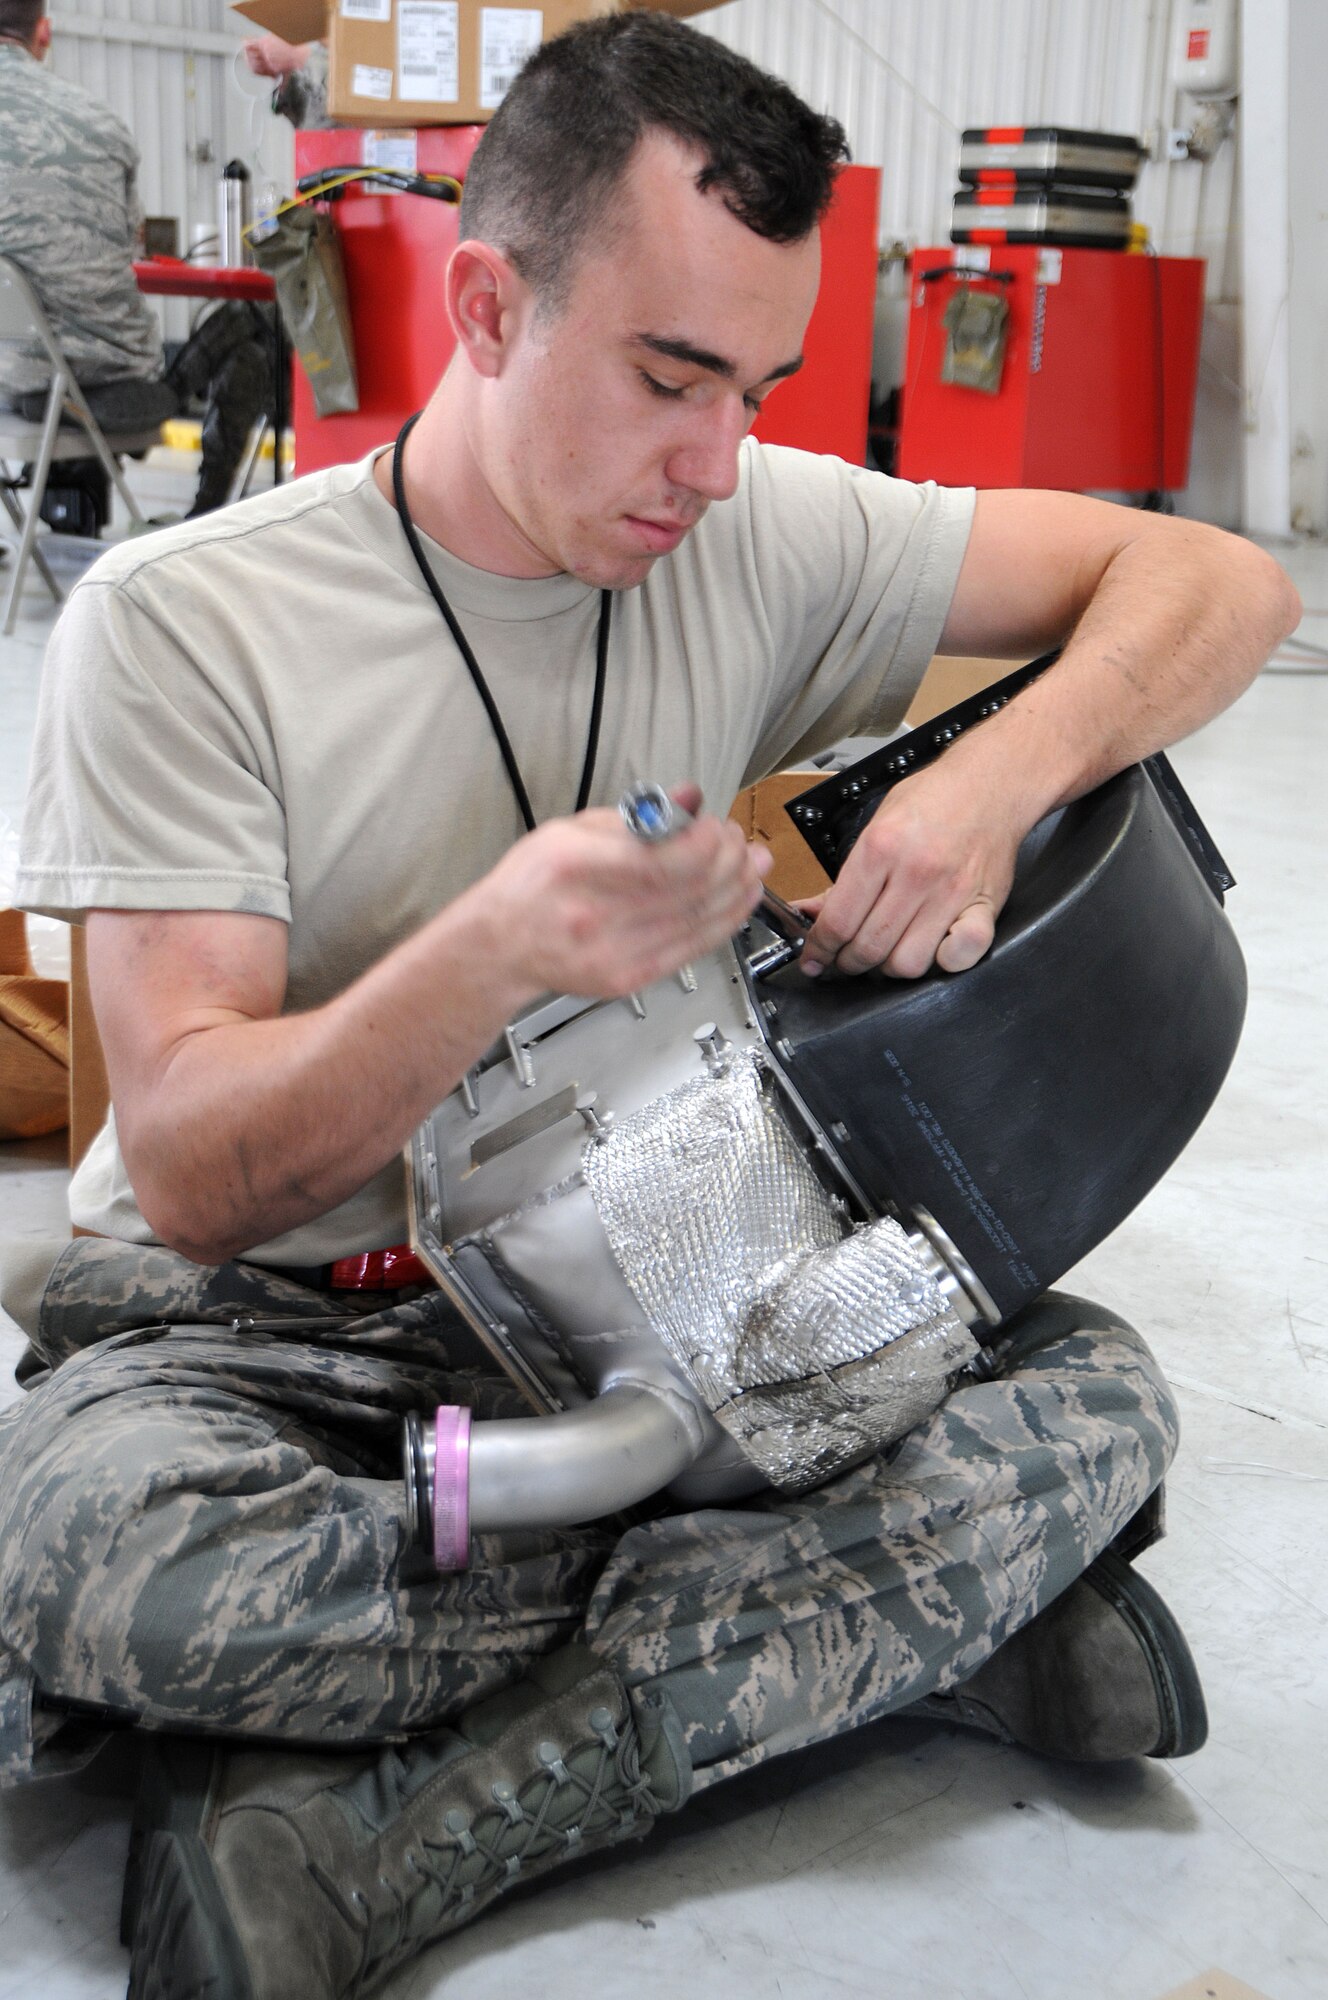 Senior Airman Matthew Gadziala, 924th Fighter Group electrical and environmental specialist, replaces the inlet and outlet ducts on a pre-cooler prior to re-installing it on a A-10 Thunderbolt II at Davis-Monthan Air Force Base, Ariz. Gadziala joined the Air Force for a change of pace however he is still going to school to be a doctor, his ultimate goal. (U.S. Air Force photo by Tech. Sgt. Courtney Richardson)